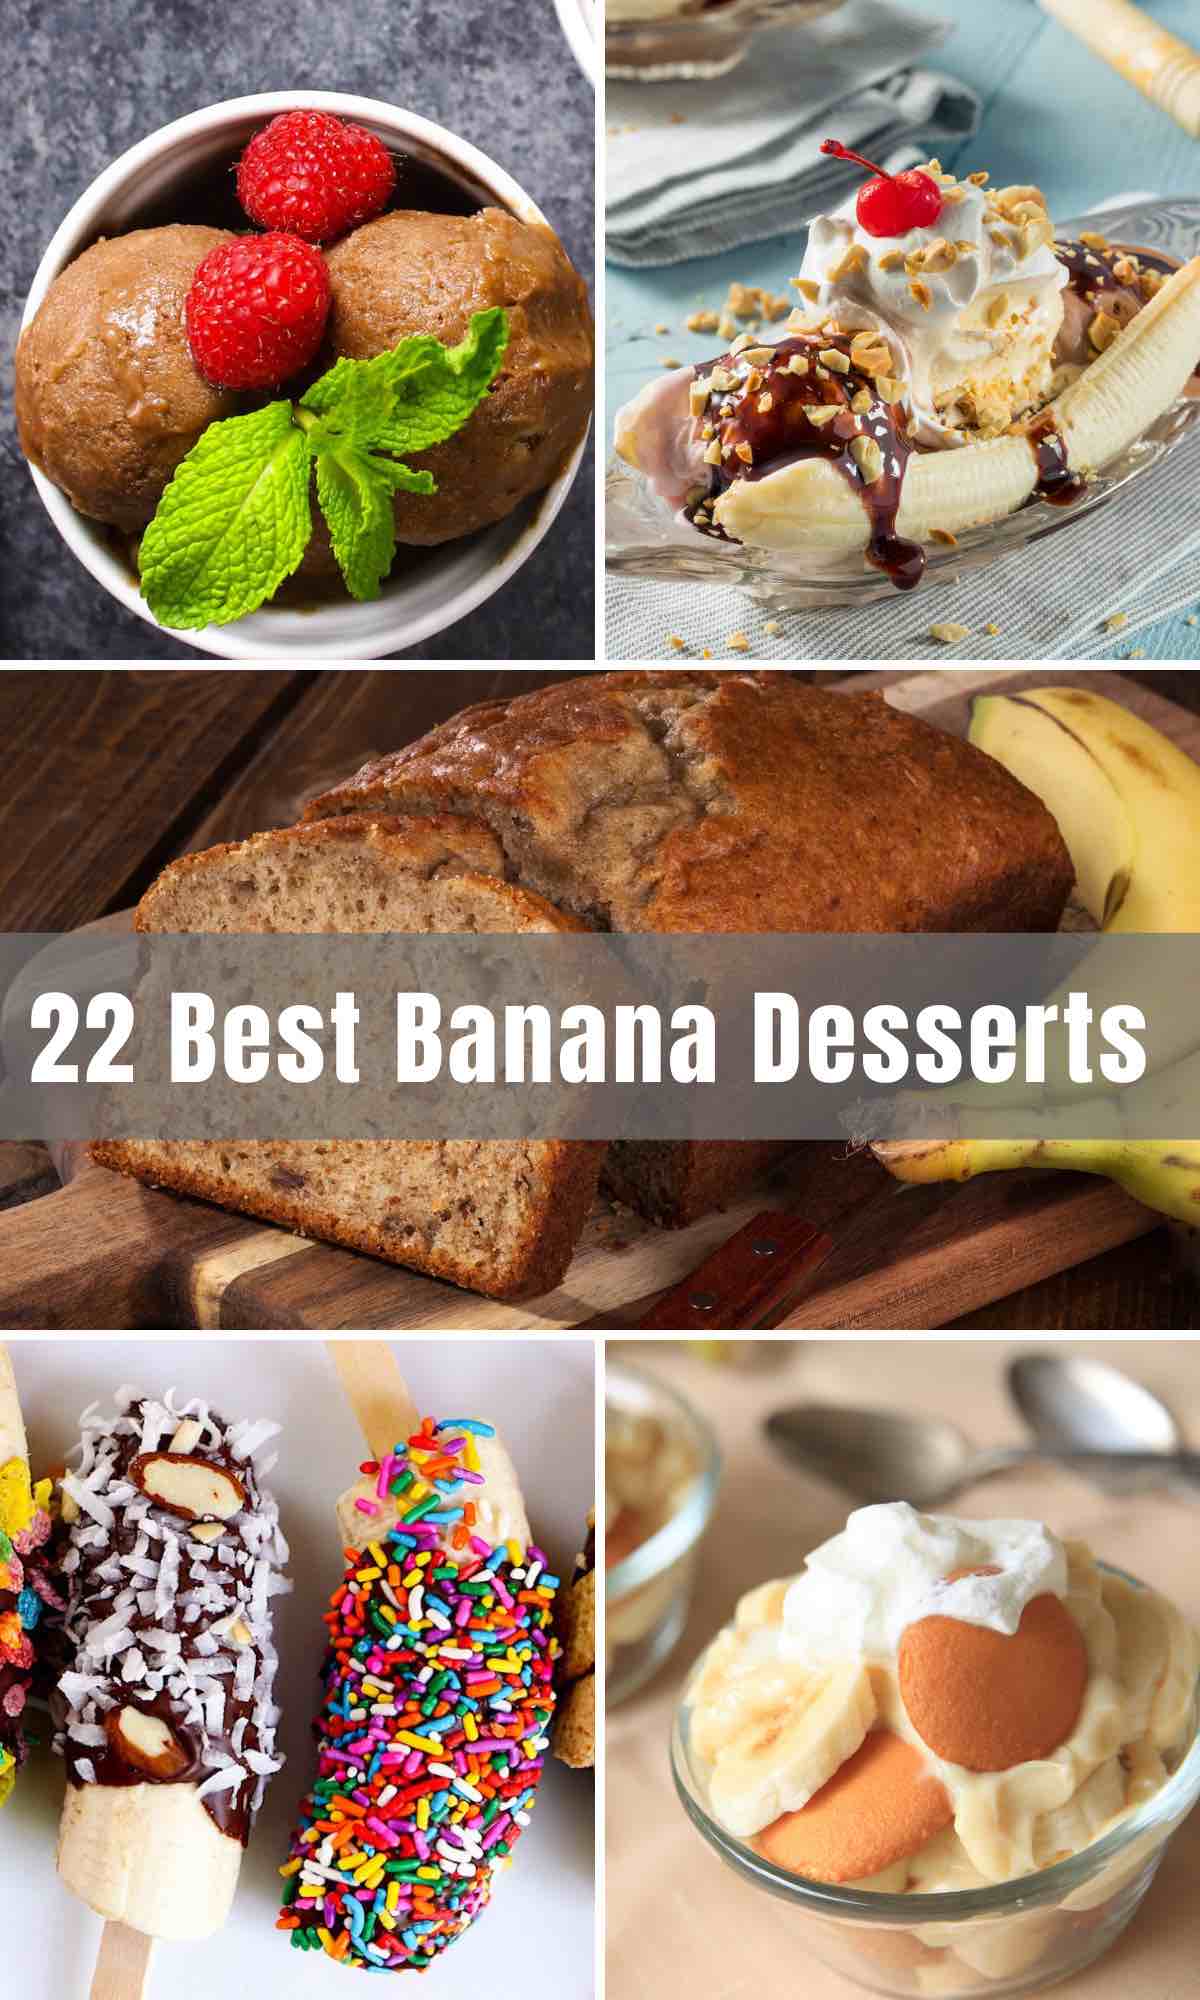 Just saying the words ‘Banana Bread’ brings comfort to my soul. Besides this most popular banana dessert, there are plenty of other ways we love to make the most out of this delicious fruit. Ever tried a fried banana? Well, you’re about to! From banana pudding to banana muffins and pancakes, to monkey bars, and of course the classic banana split - there are 22 Best Banana Desserts all waiting for you below.